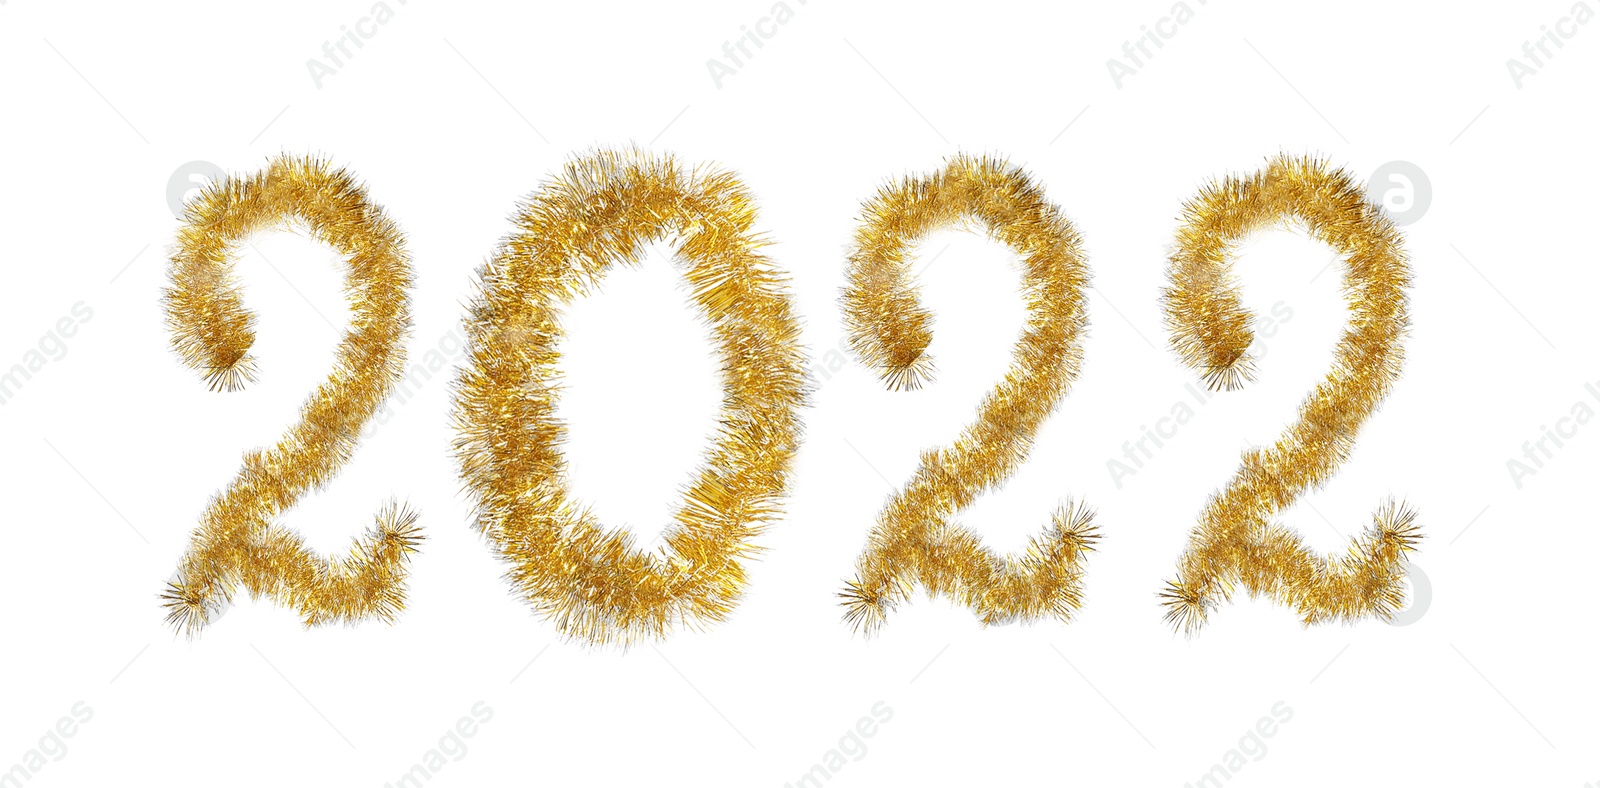 Image of Number 2022 made of shiny golden tinsels on white background, banner design